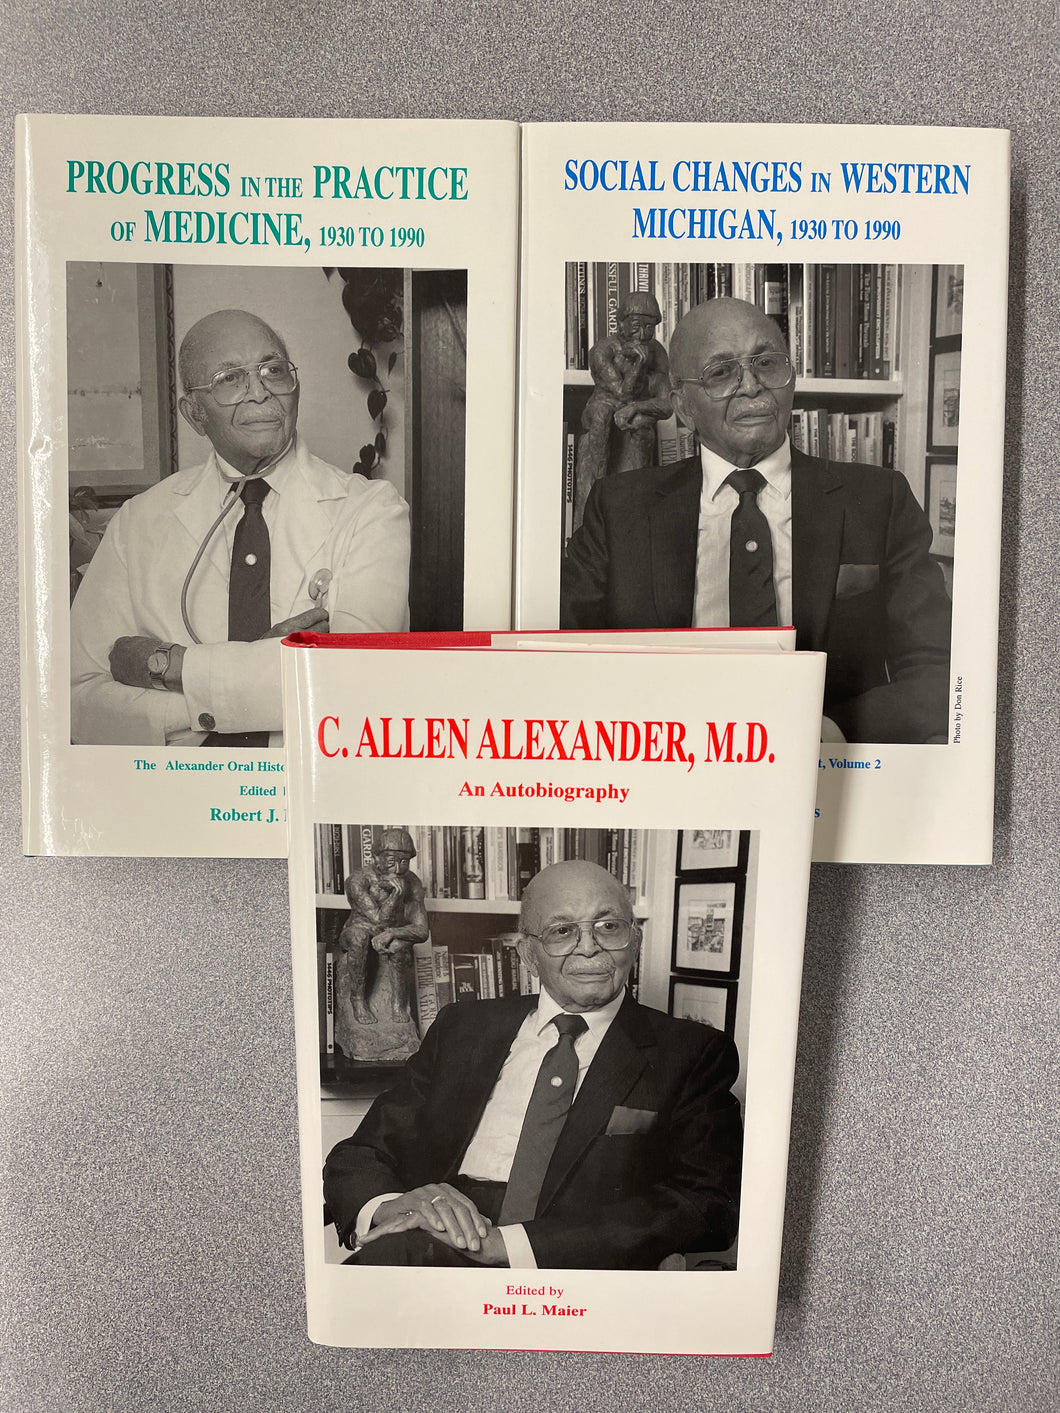 SS The Alexander Oral History Project , 3 volumes, Alexander, C. Allen, M.D. [1997] N 4/24